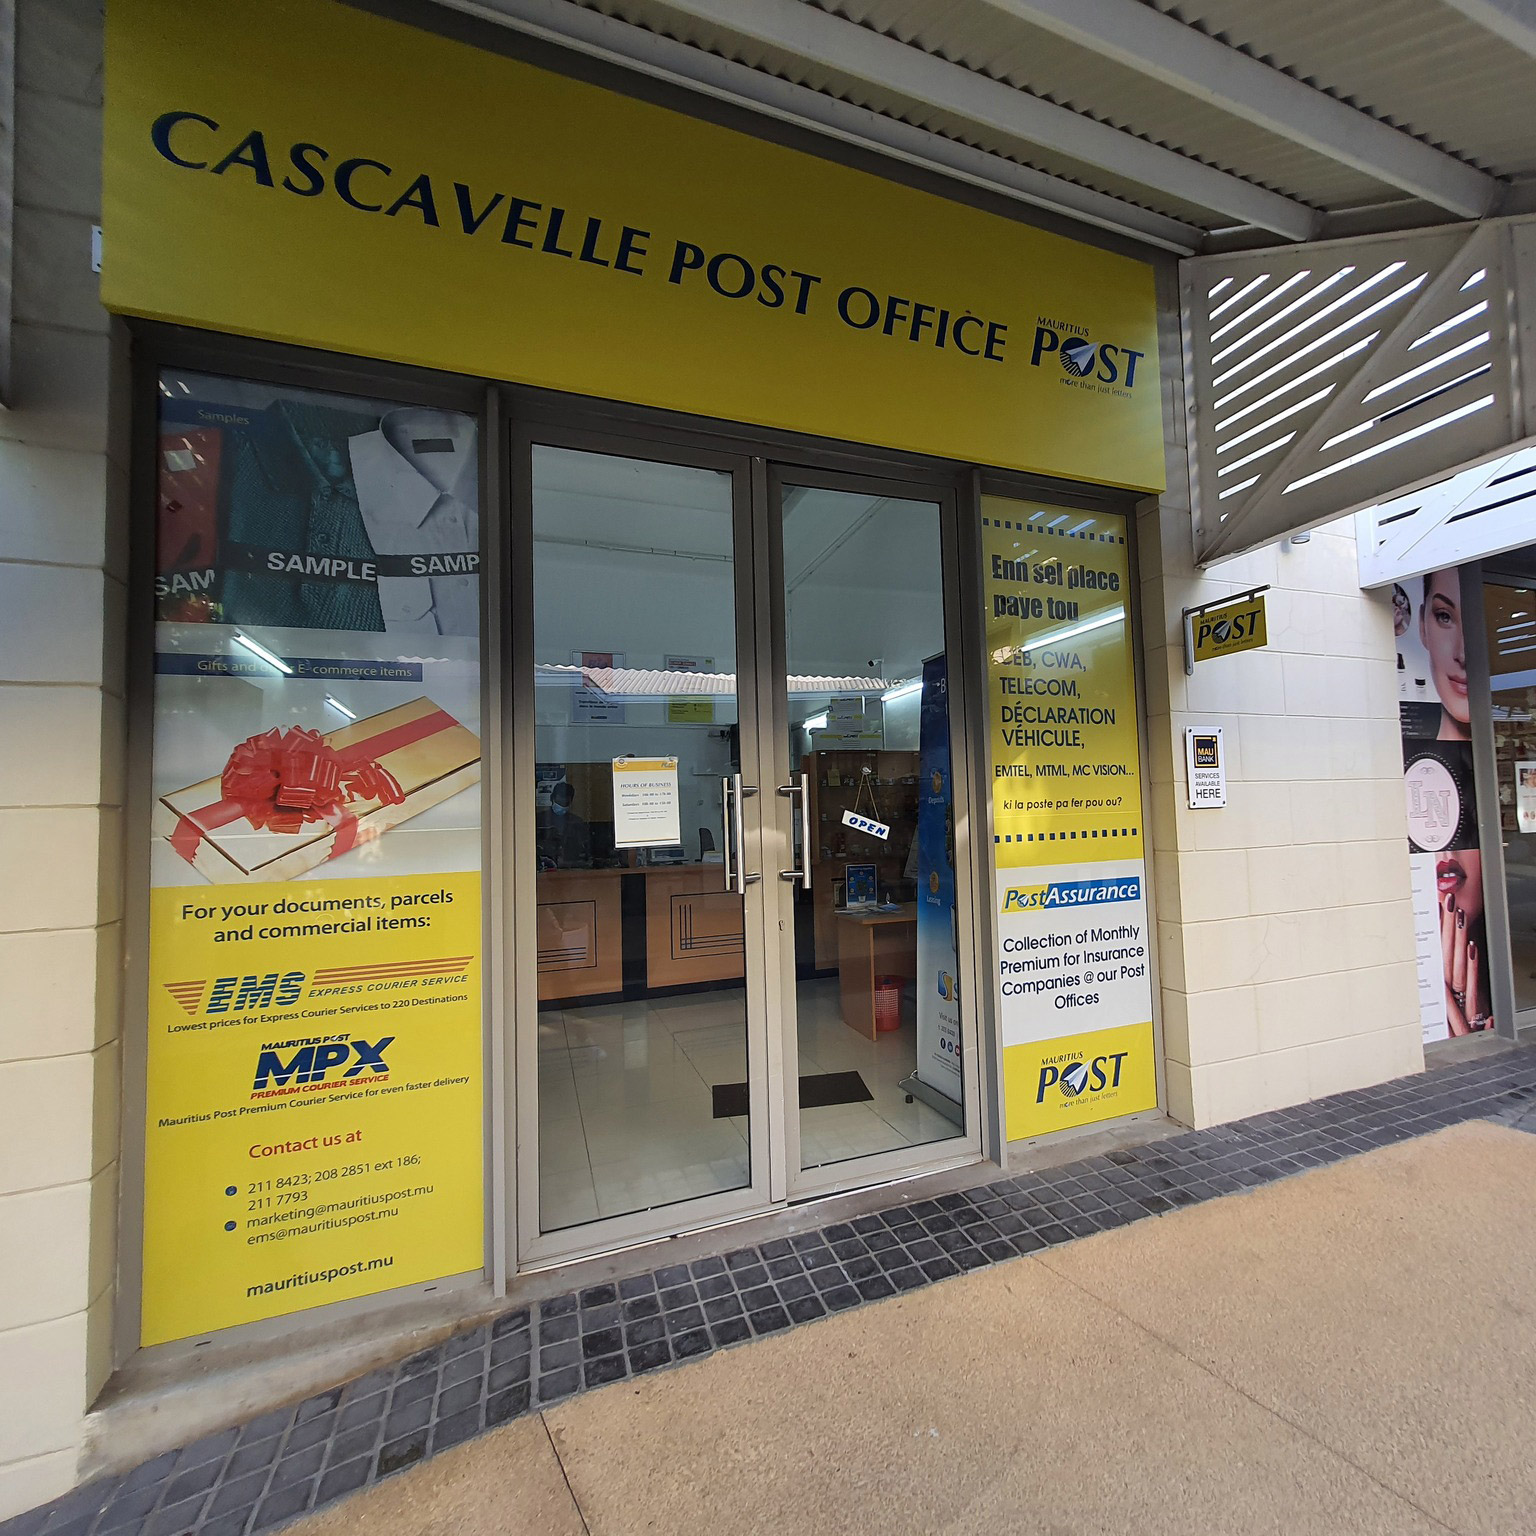 Mauritius Post - Cascavelle Shopping Mall